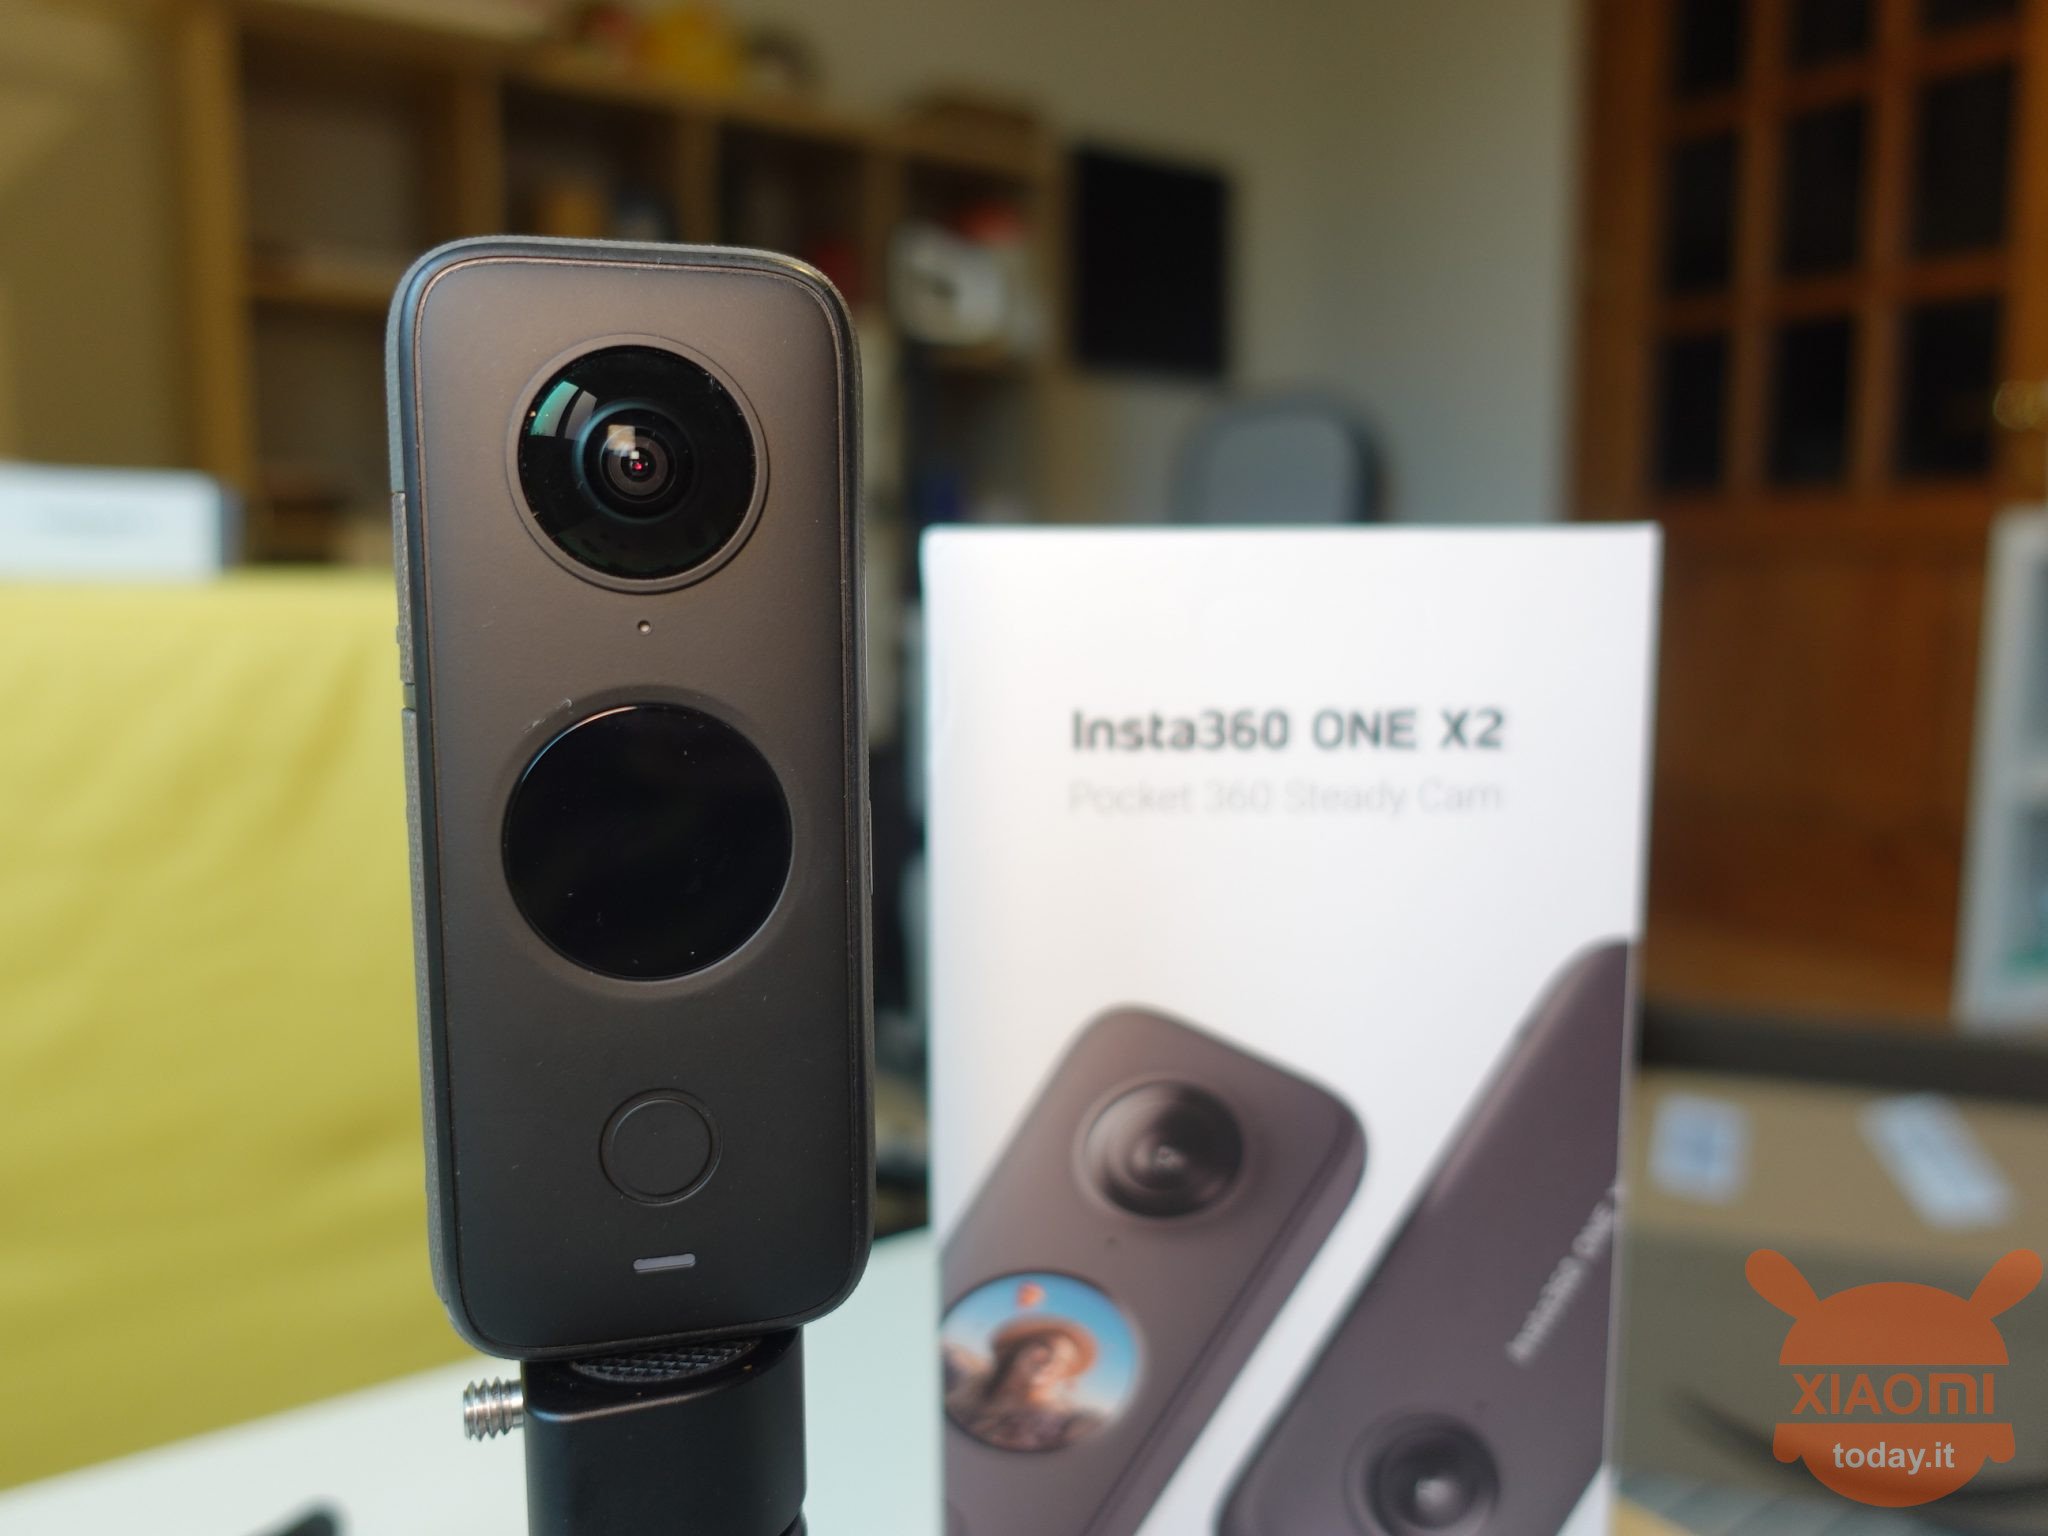 Insta360 One X2 front view